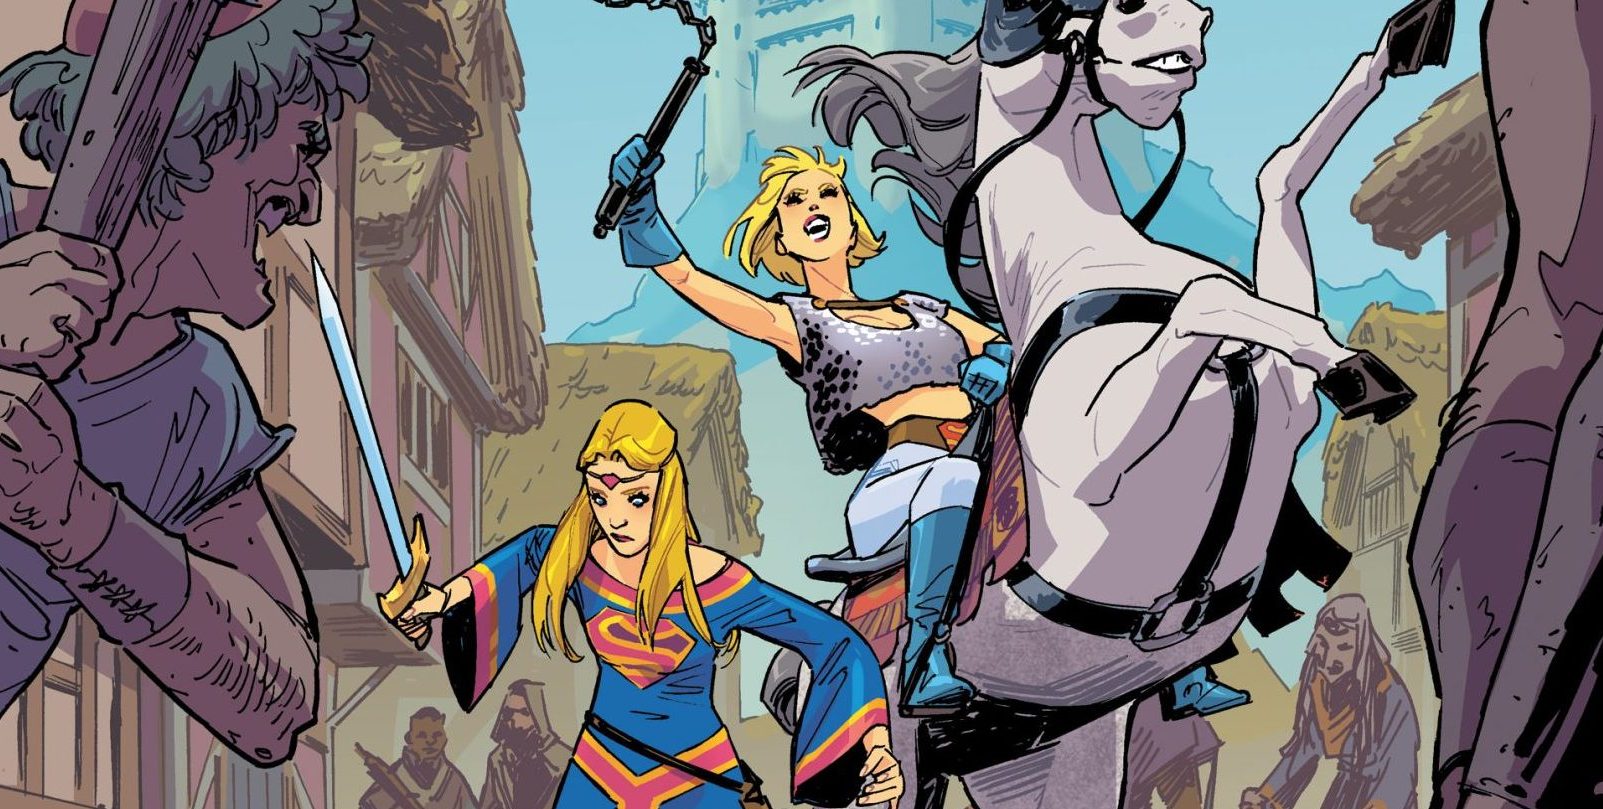 'Power Girl' #7 boasts swords, sorcery, and Supergirl